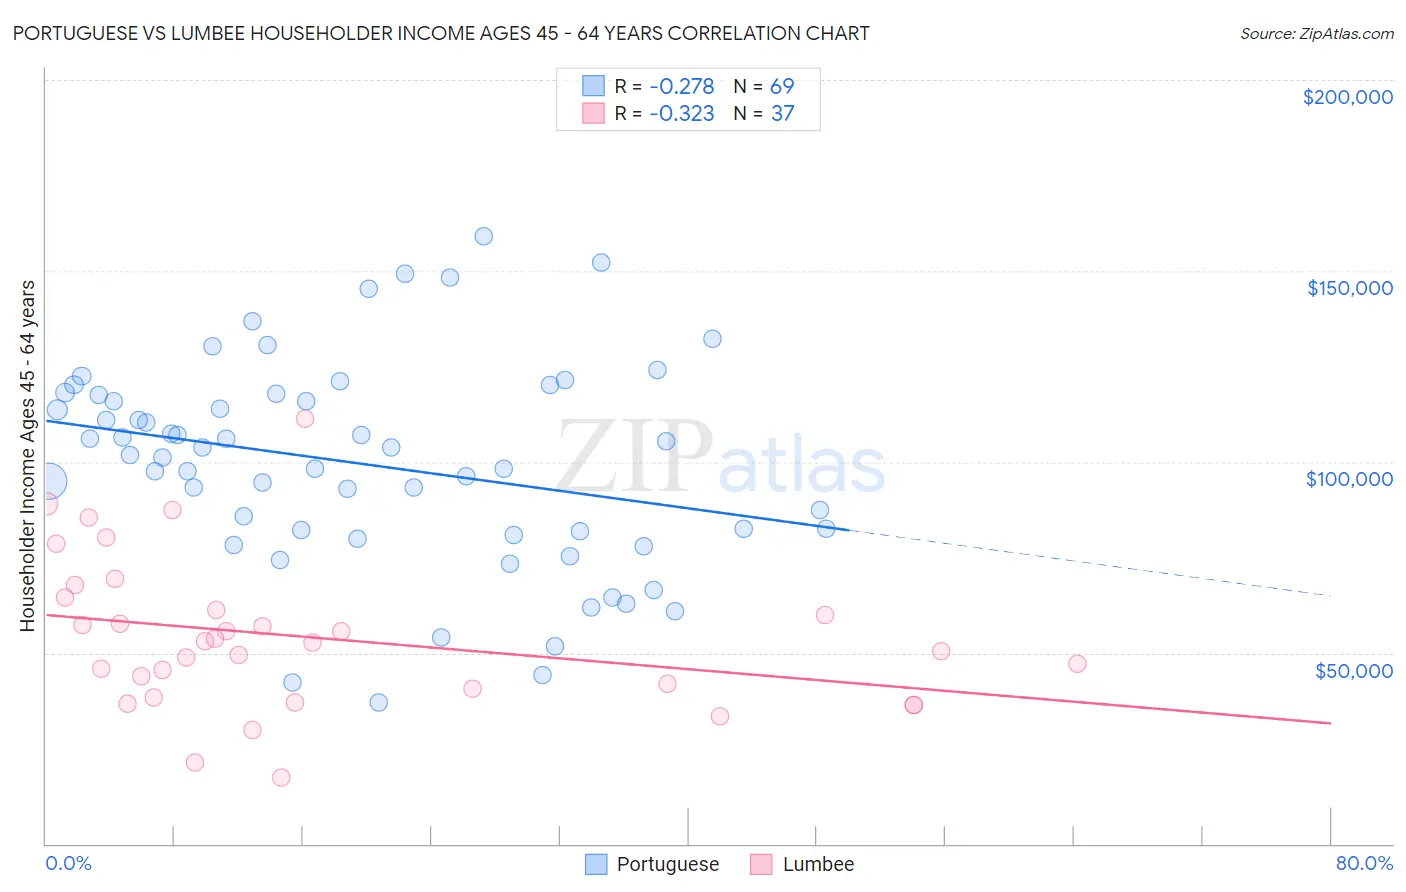 Portuguese vs Lumbee Householder Income Ages 45 - 64 years